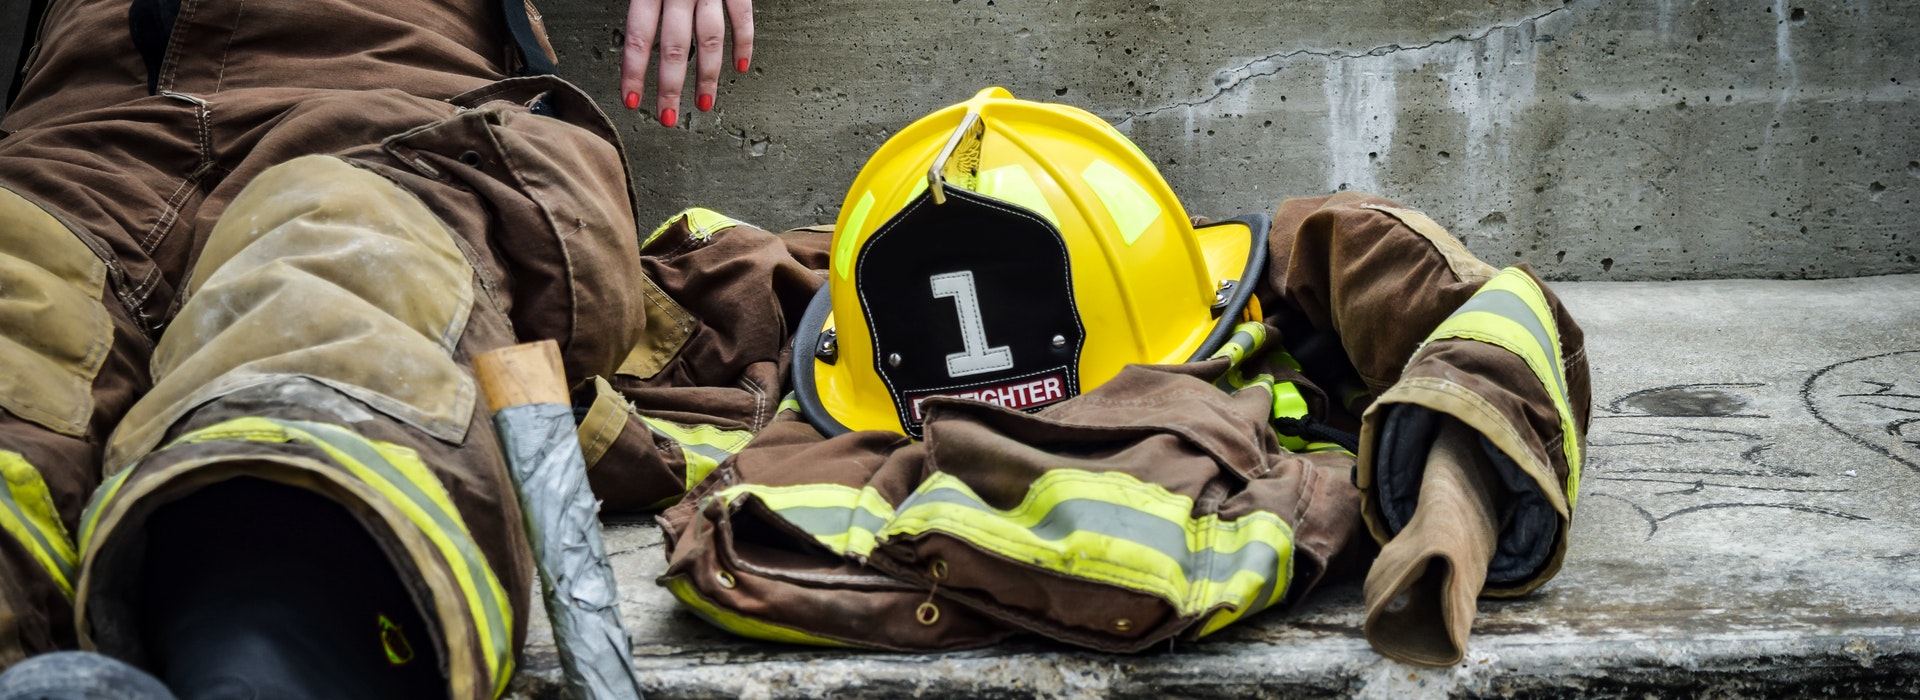 A yellow hardhat and firefighter’s jacket sits next to a firefighter sitting on the ground